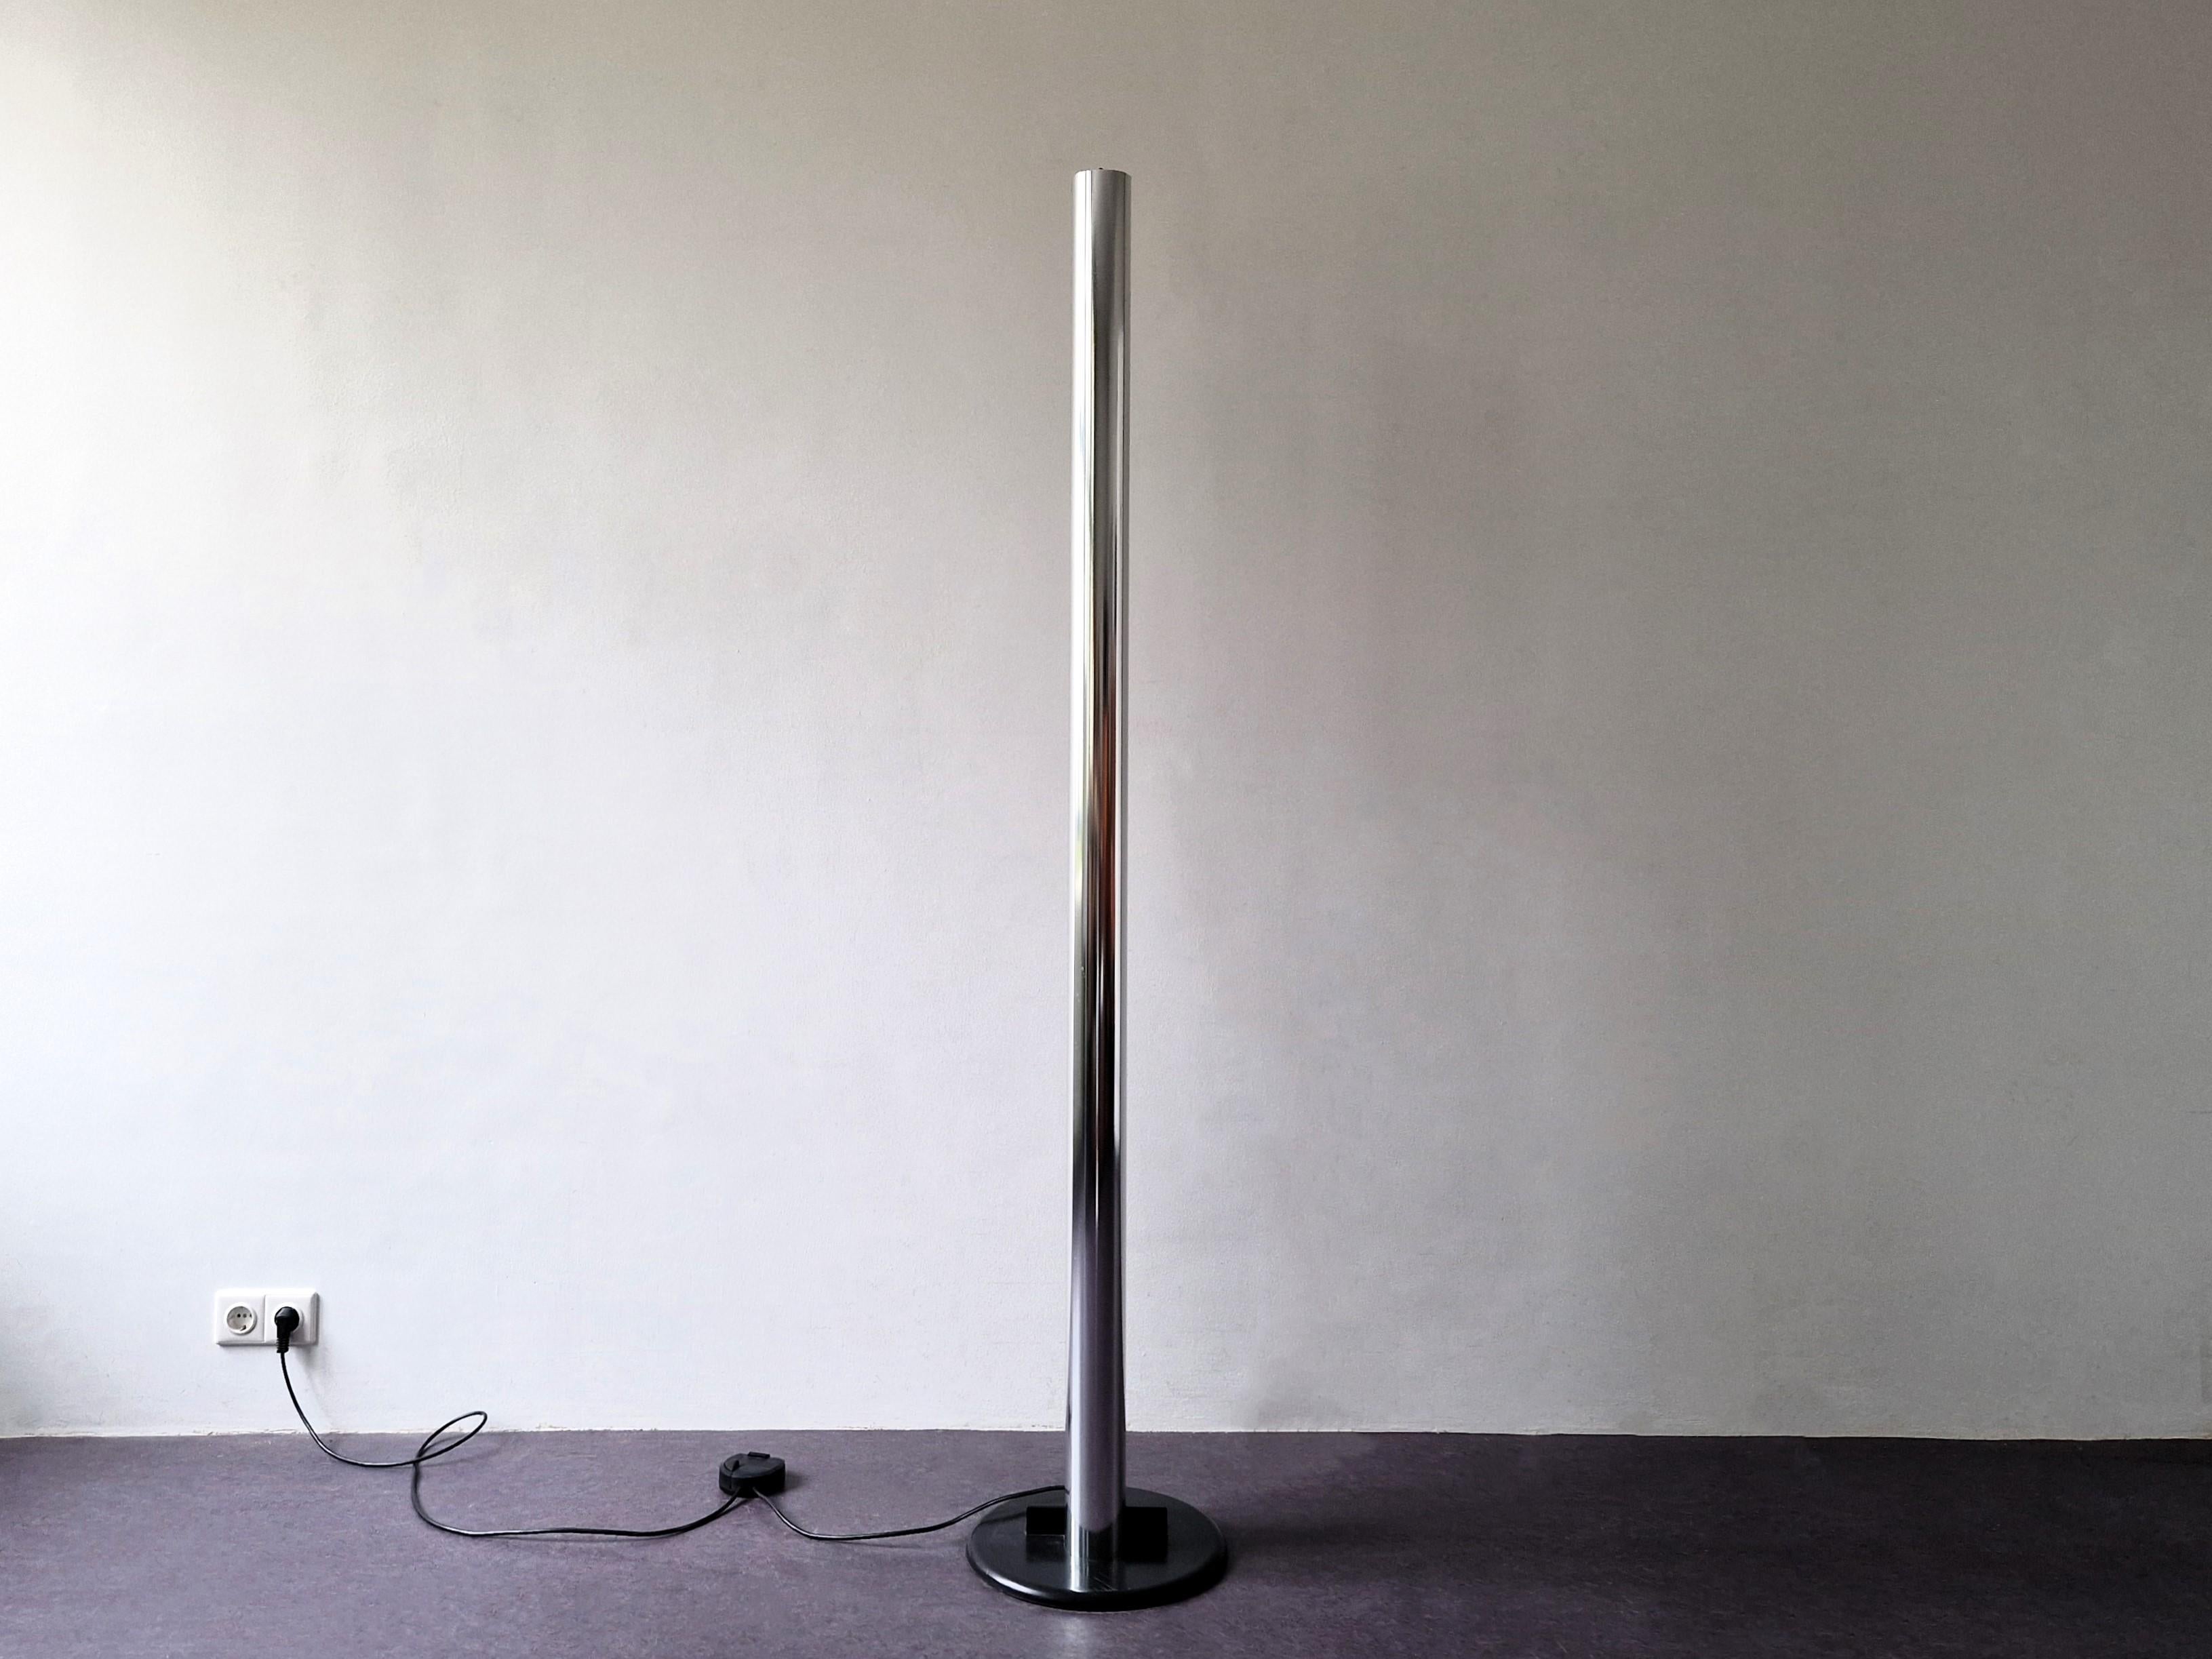 The Megaron floor lamp was designed by Gianfranco Frattini for Artemide in Italy. An iconic piece of midcentury Italian design, that is still in production. This piece is an early version, as it does not have the inbuild dimmer that the more later